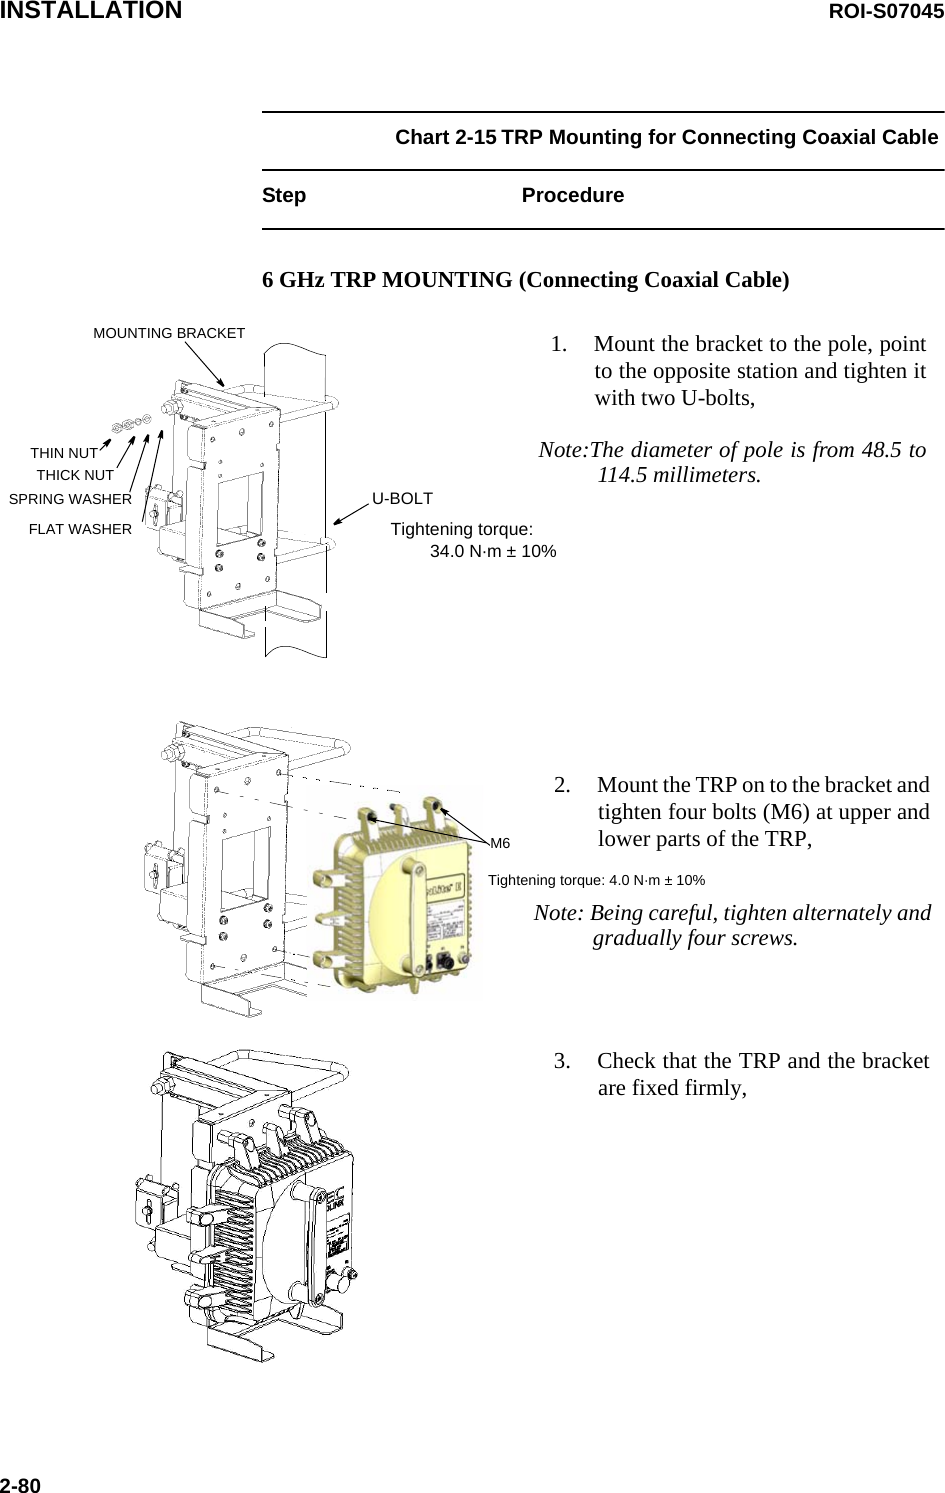 INSTALLATION ROI-S070452-80Chart 2-15 TRP Mounting for Connecting Coaxial Cable Step Procedure6 GHz TRP MOUNTING (Connecting Coaxial Cable)1. Mount the bracket to the pole, pointto the opposite station and tighten itwith two U-bolts,Note:The diameter of pole is from 48.5 to114.5 millimeters.THIN NUTTHICK NUTSPRING WASHERFLAT WASHERU-BOLTMOUNTING BRACKET2. Mount the TRP on to the bracket andtighten four bolts (M6) at upper andlower parts of the TRP,M63. Check that the TRP and the bracketare fixed firmly,Tightening torque: 4.0 N·m ± 10%Tightening torque:         34.0 N·m ± 10%Note: Being careful, tighten alternately andgradually four screws.